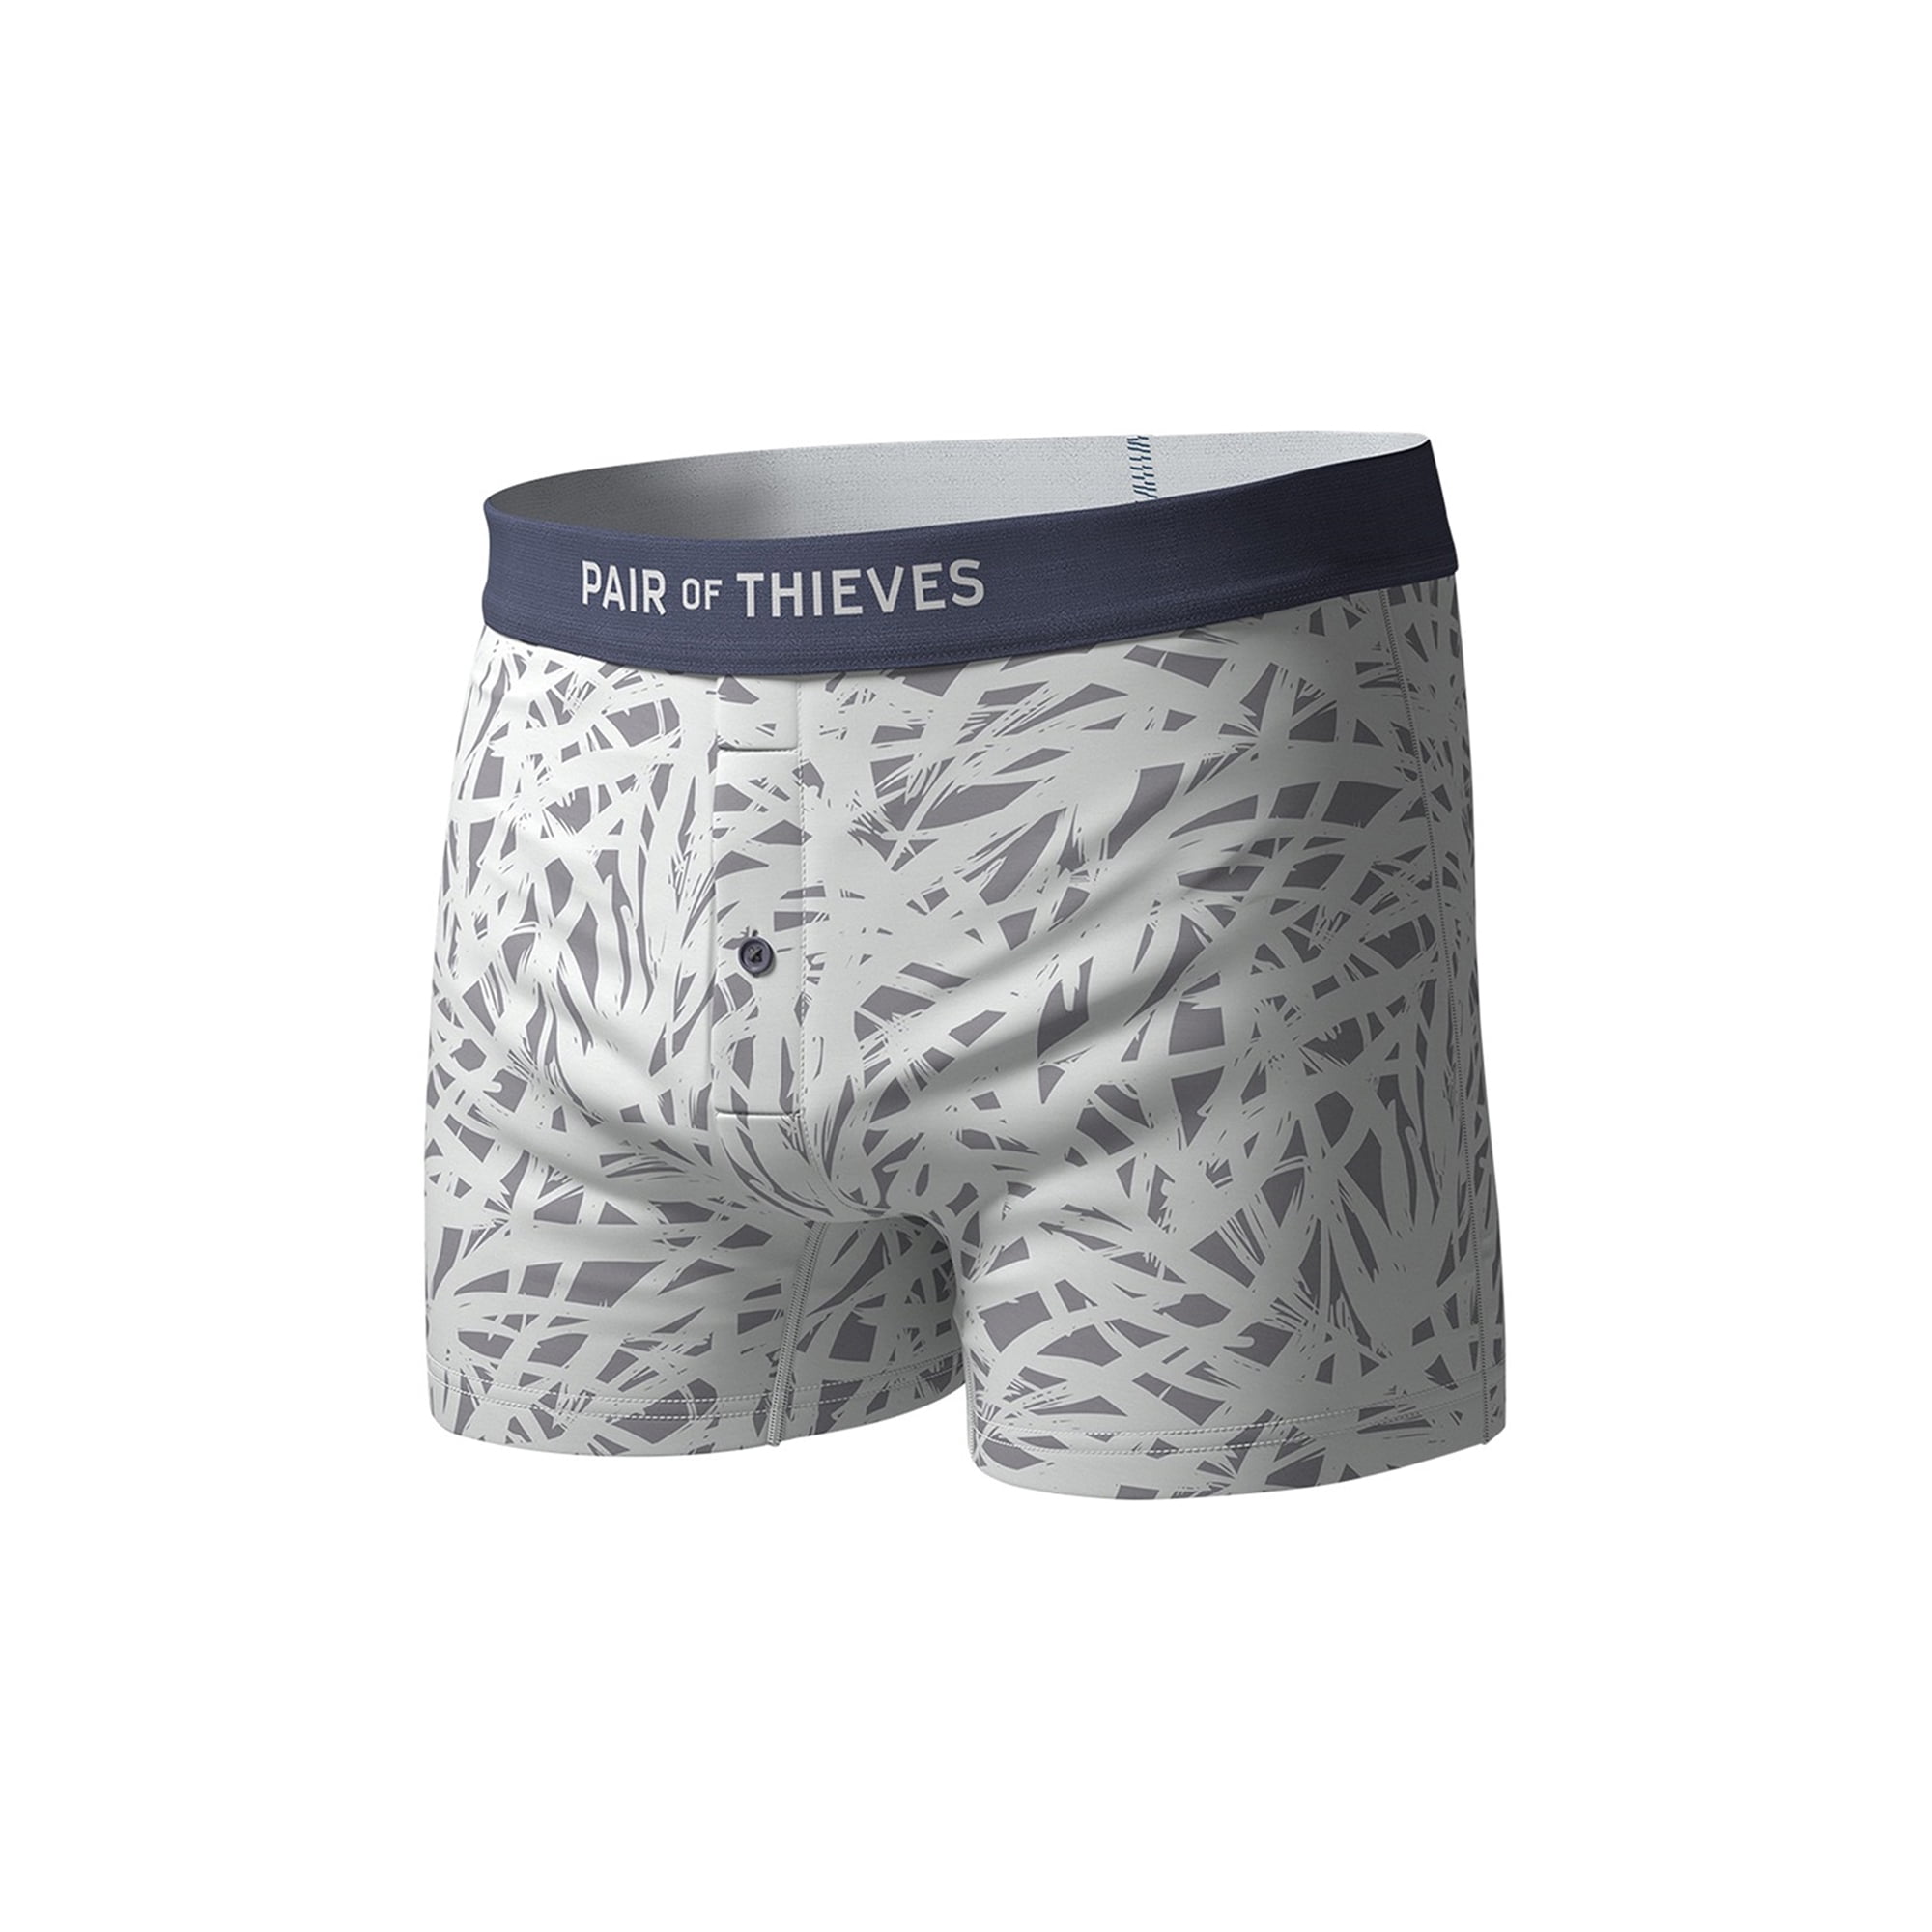 Pair of Thieves - Pair of Thieves Mens Not Guilty Underwear Boxer ...